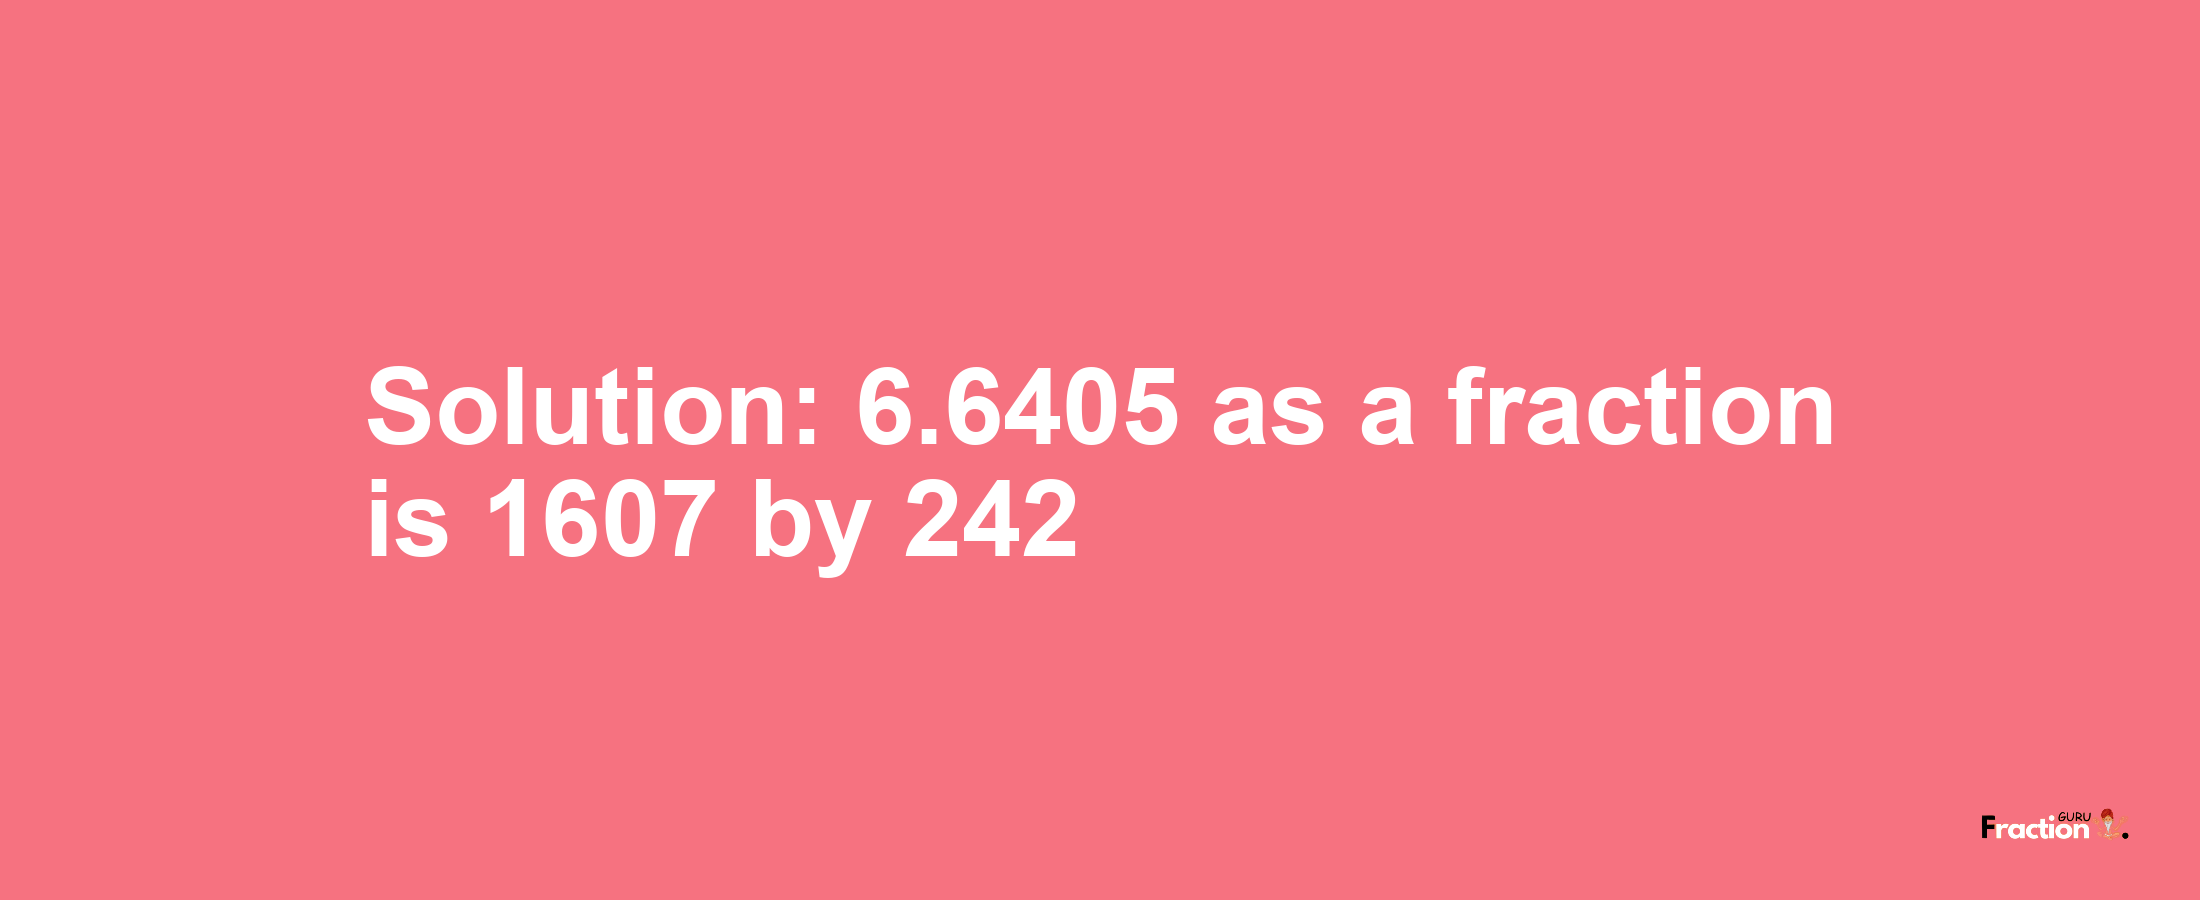 Solution:6.6405 as a fraction is 1607/242